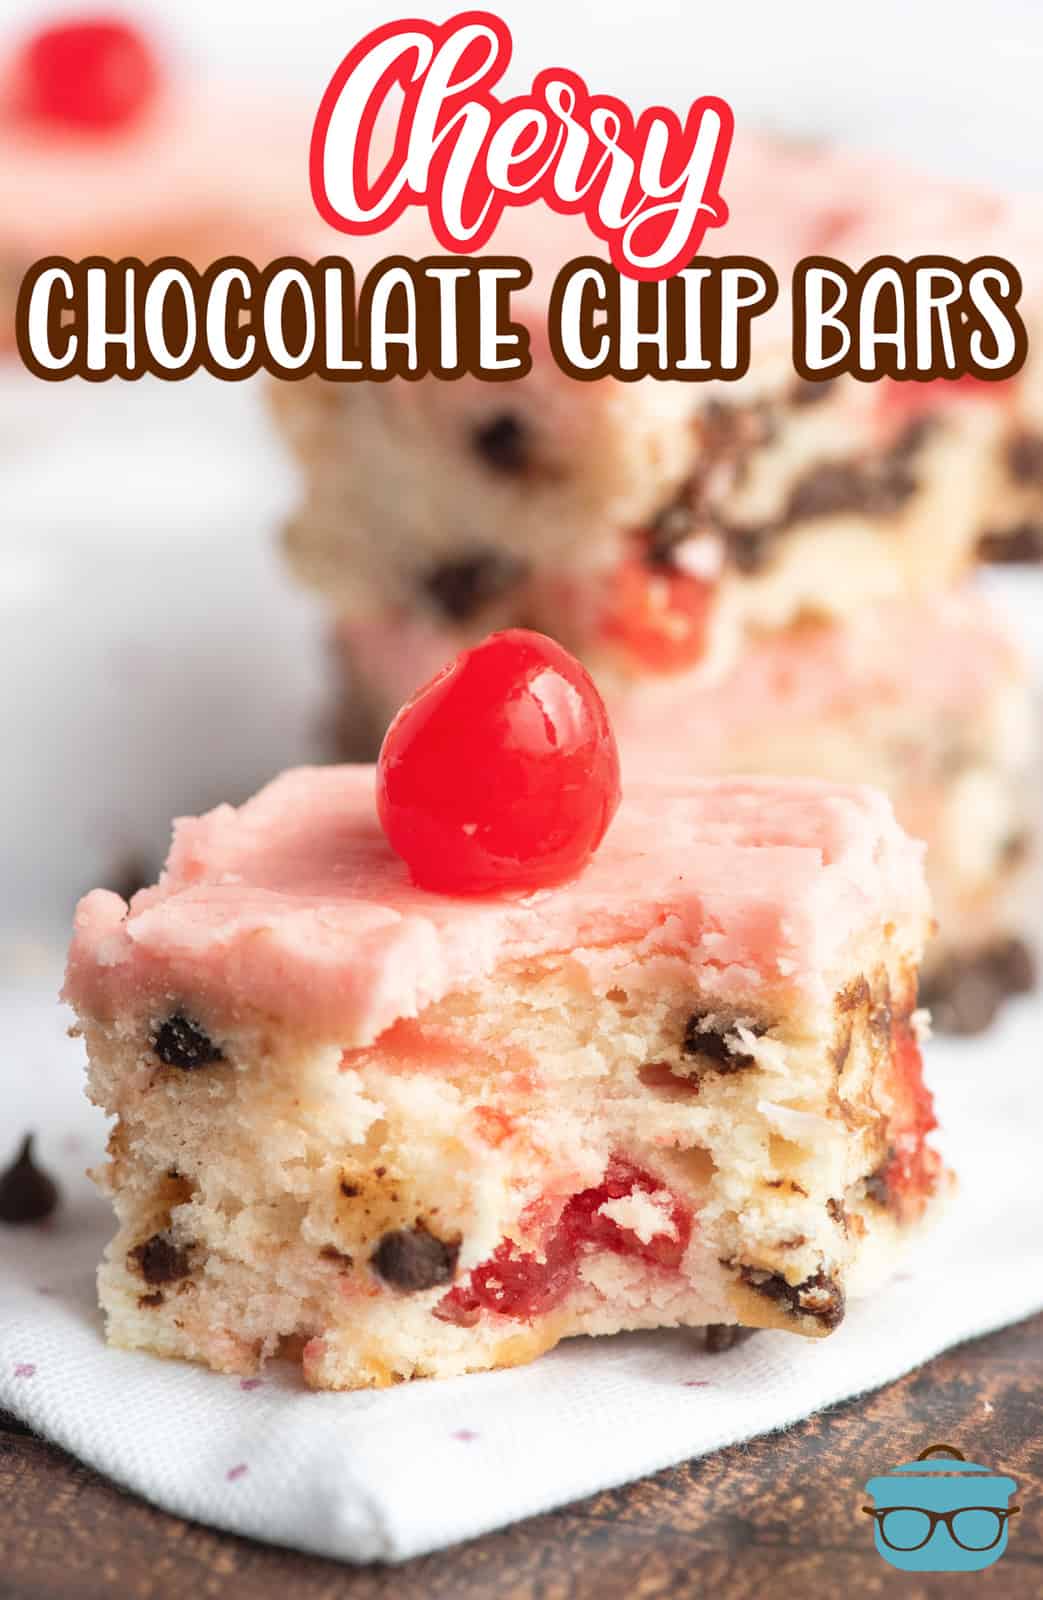 Pinterest image of one Cherry Chocolate Chip Bar with cherry on top and bite taken out.